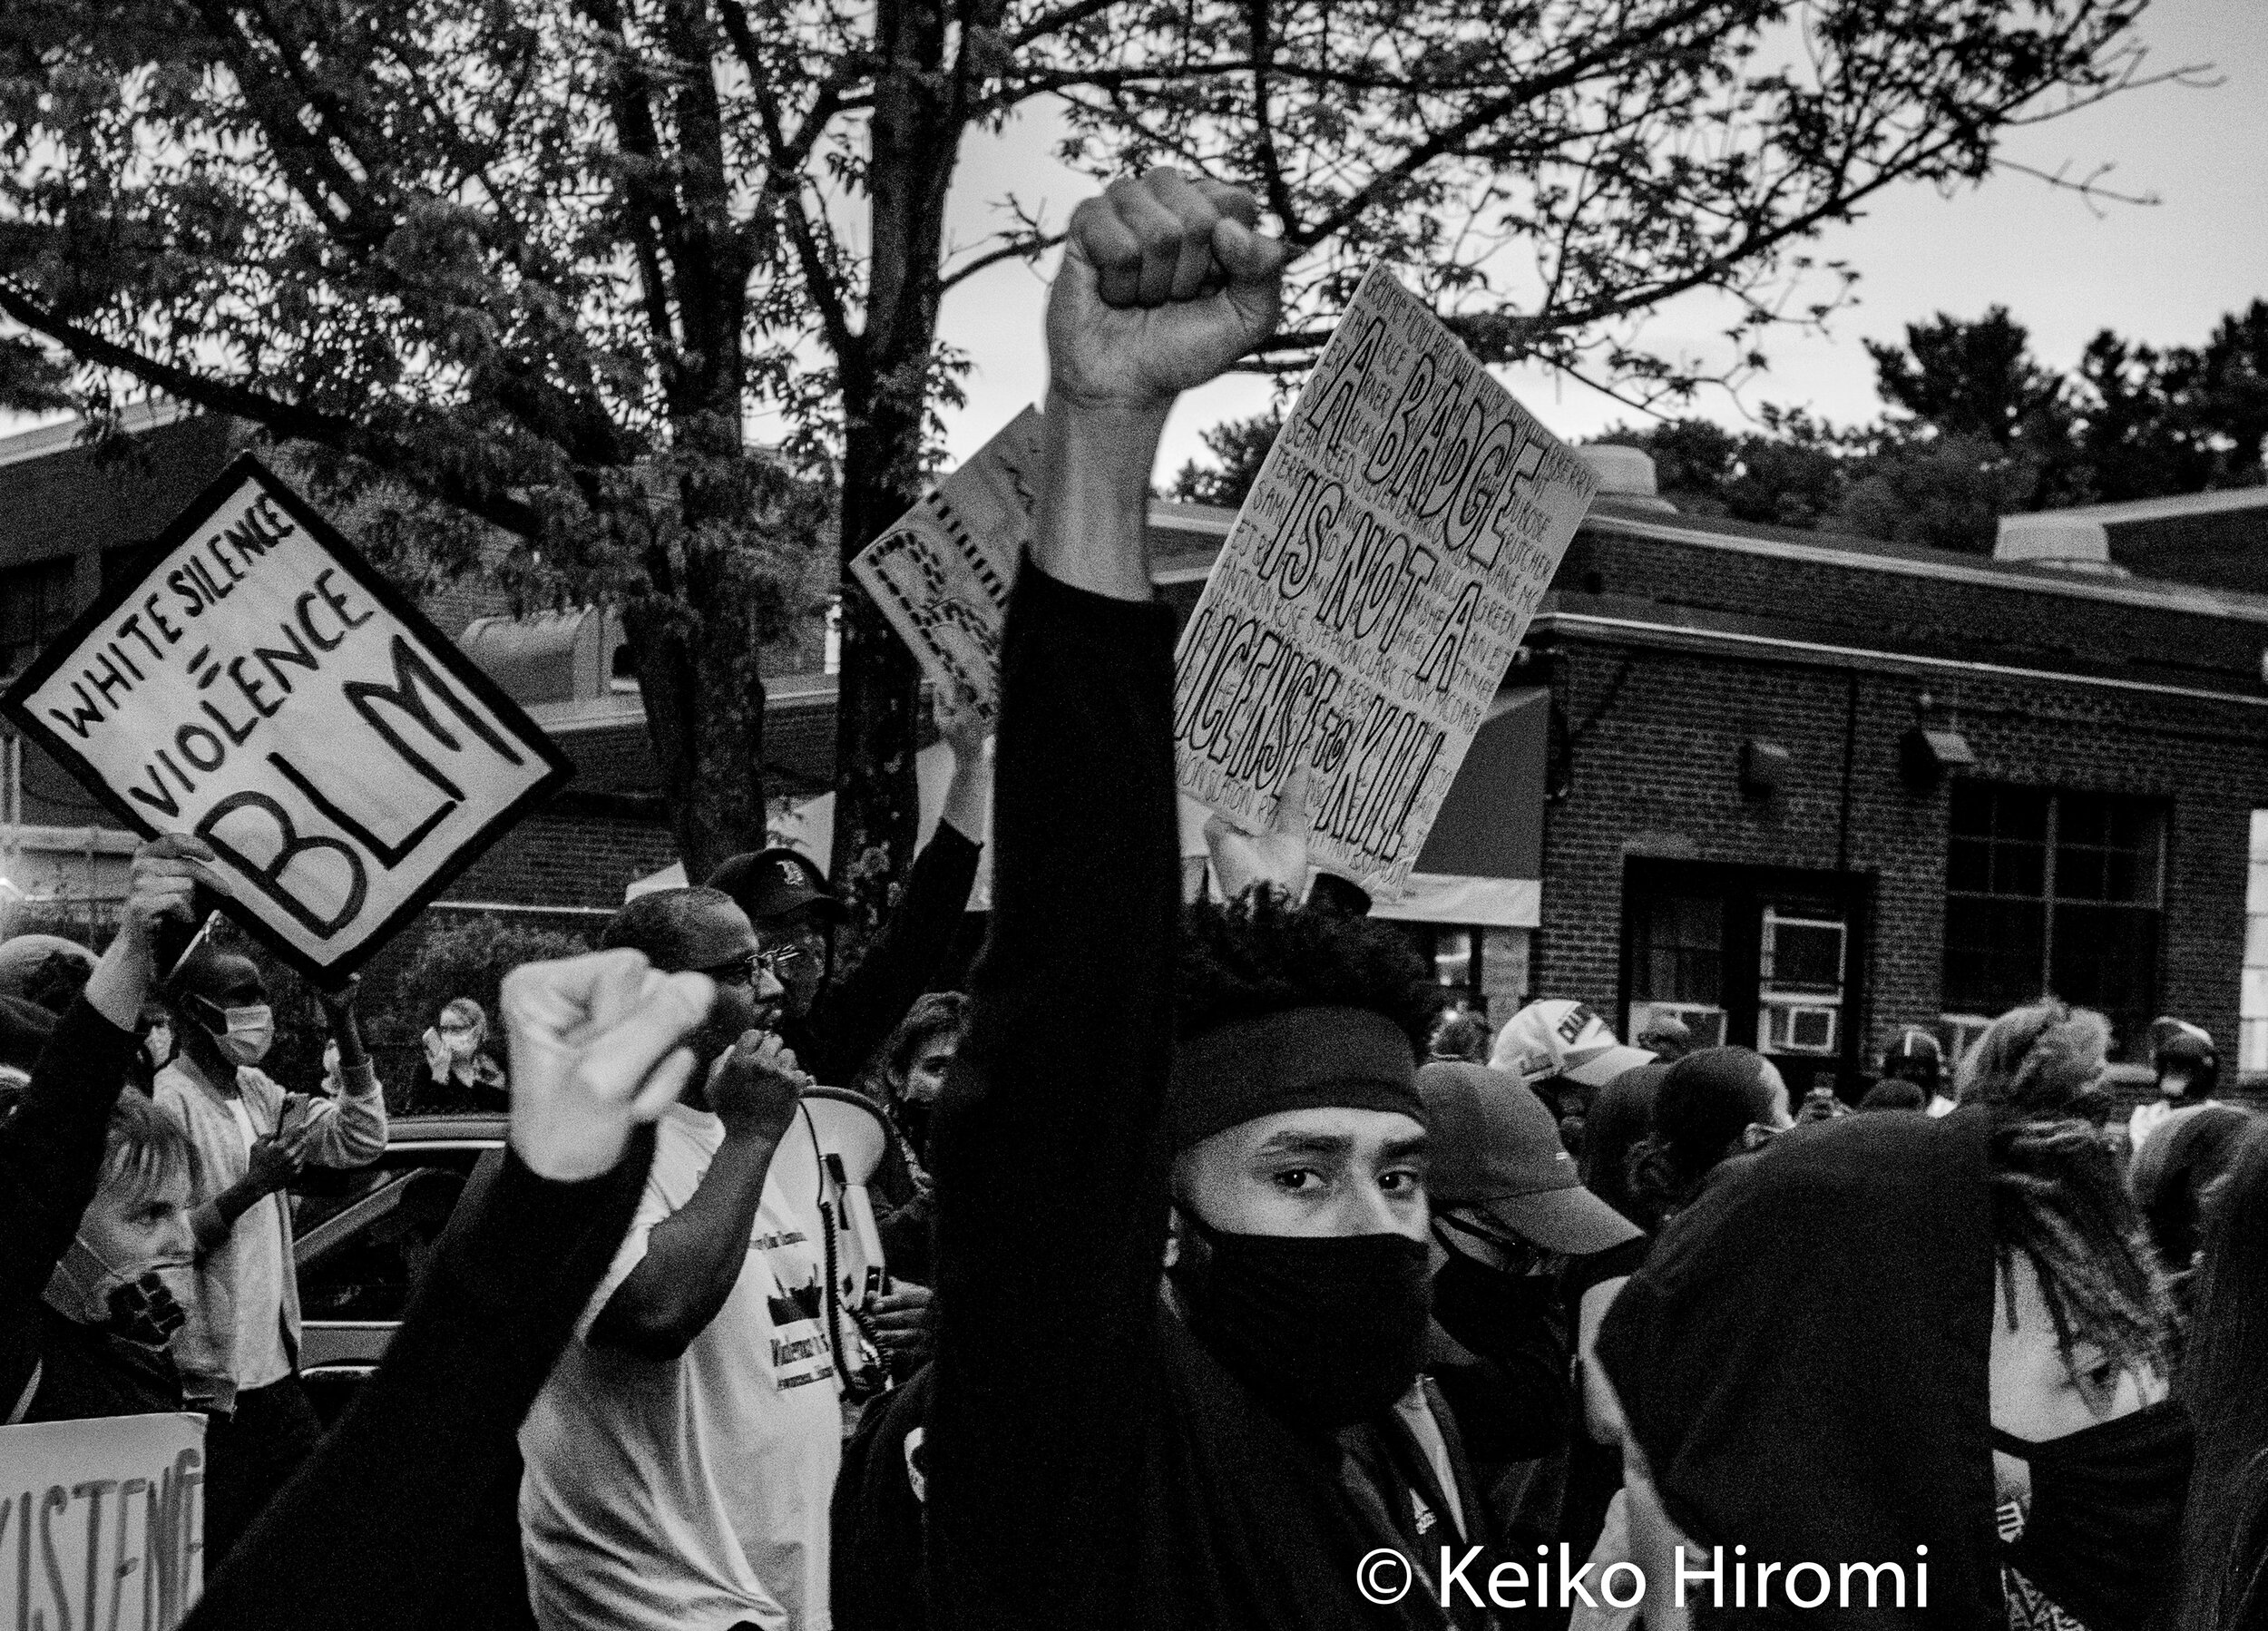  June 2, 2020, Boston, Massachusetts, USA: A protester raises his fist and marches during a rally in response to deaths of George Floyd and against police brutality and racism at Franklin Park in Boston. 